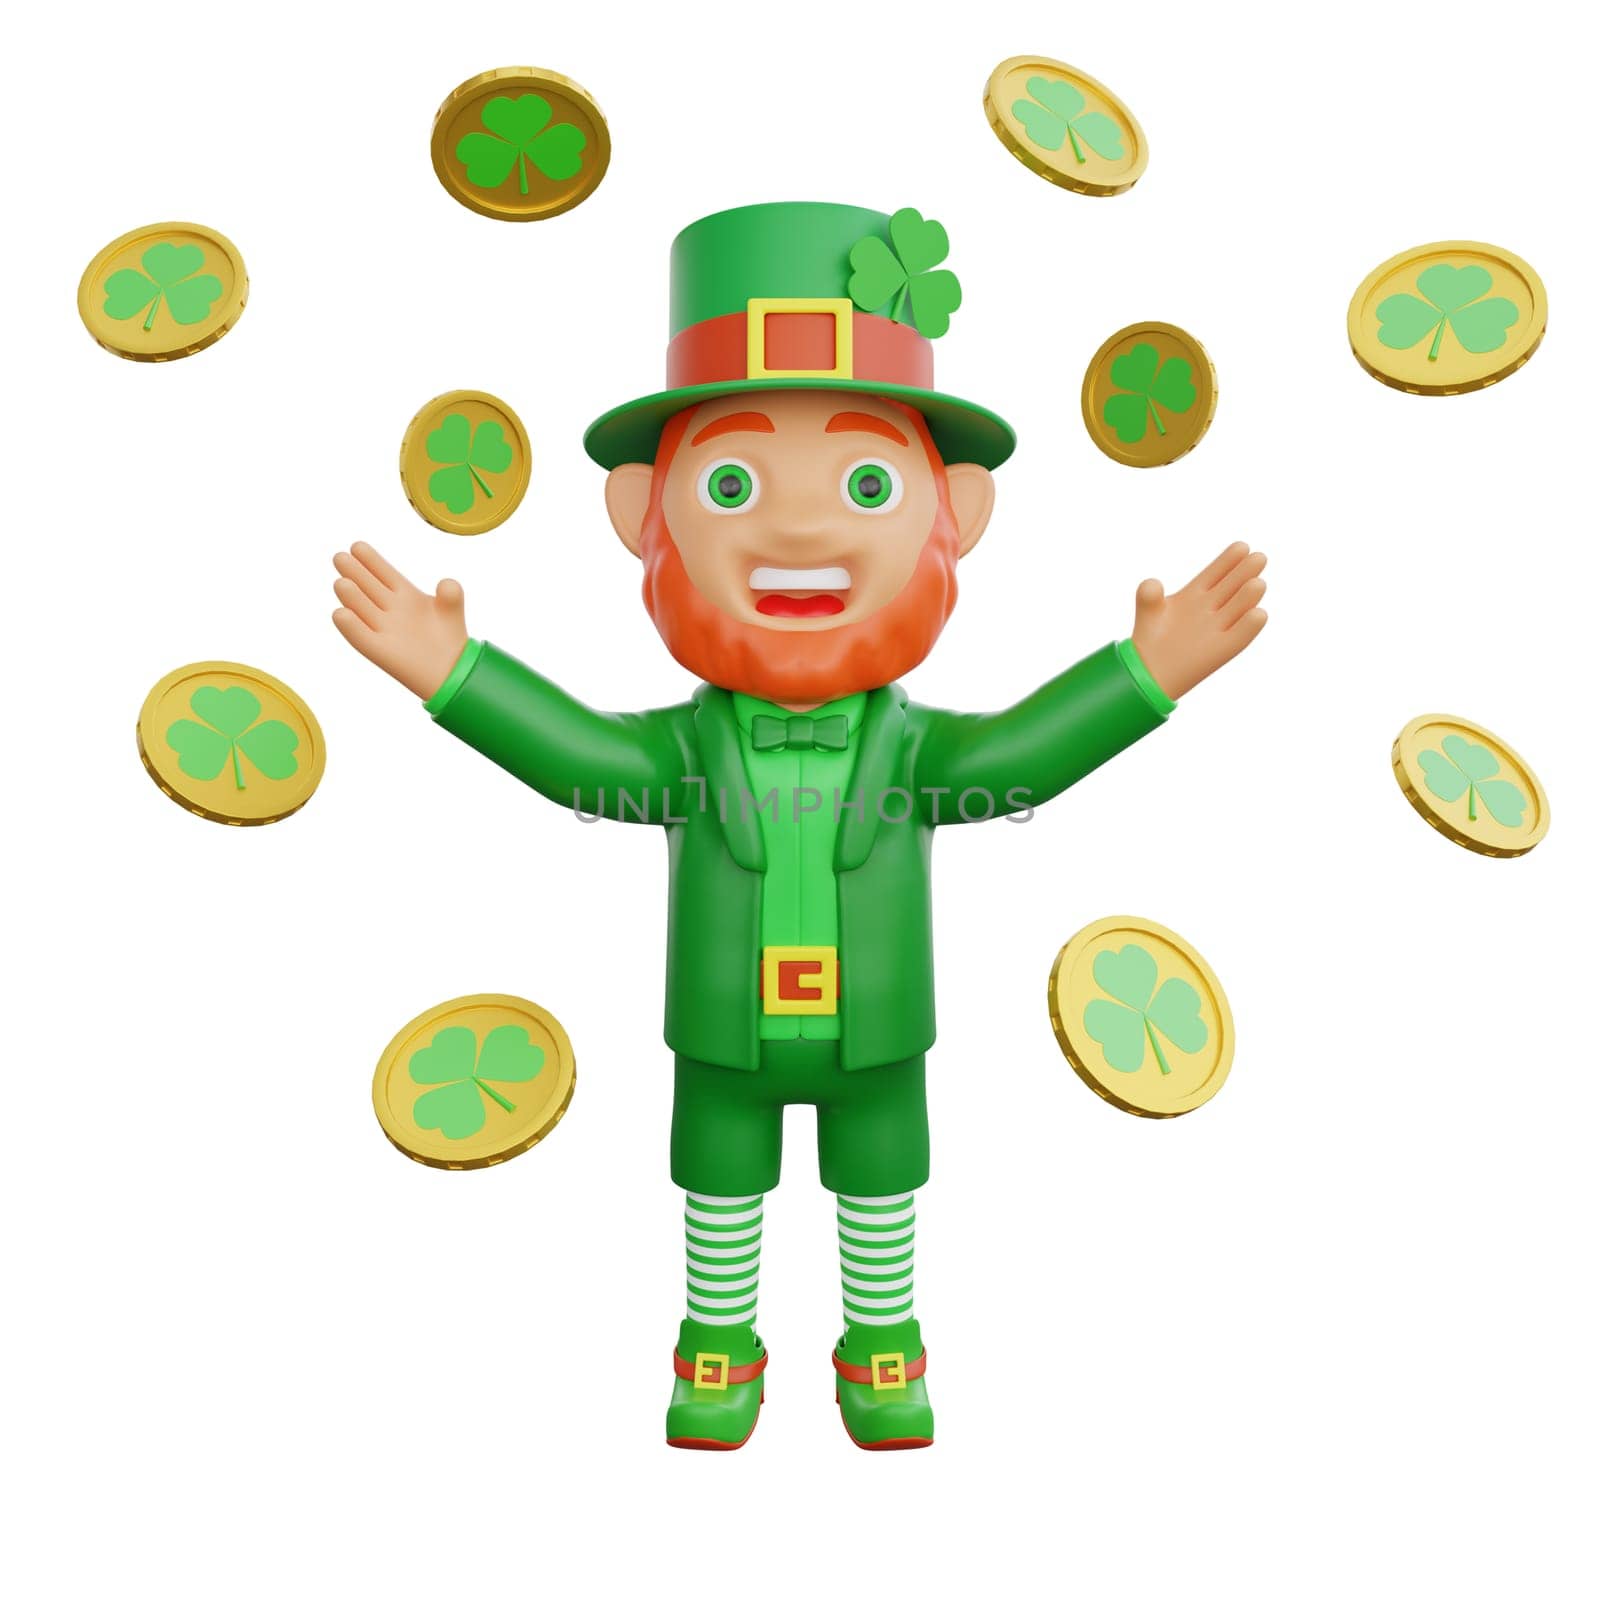 3D illustration of leprechaun surrounded by golden coins adorned with leaf clovers, perfect for St. Patrick's Day themed projects